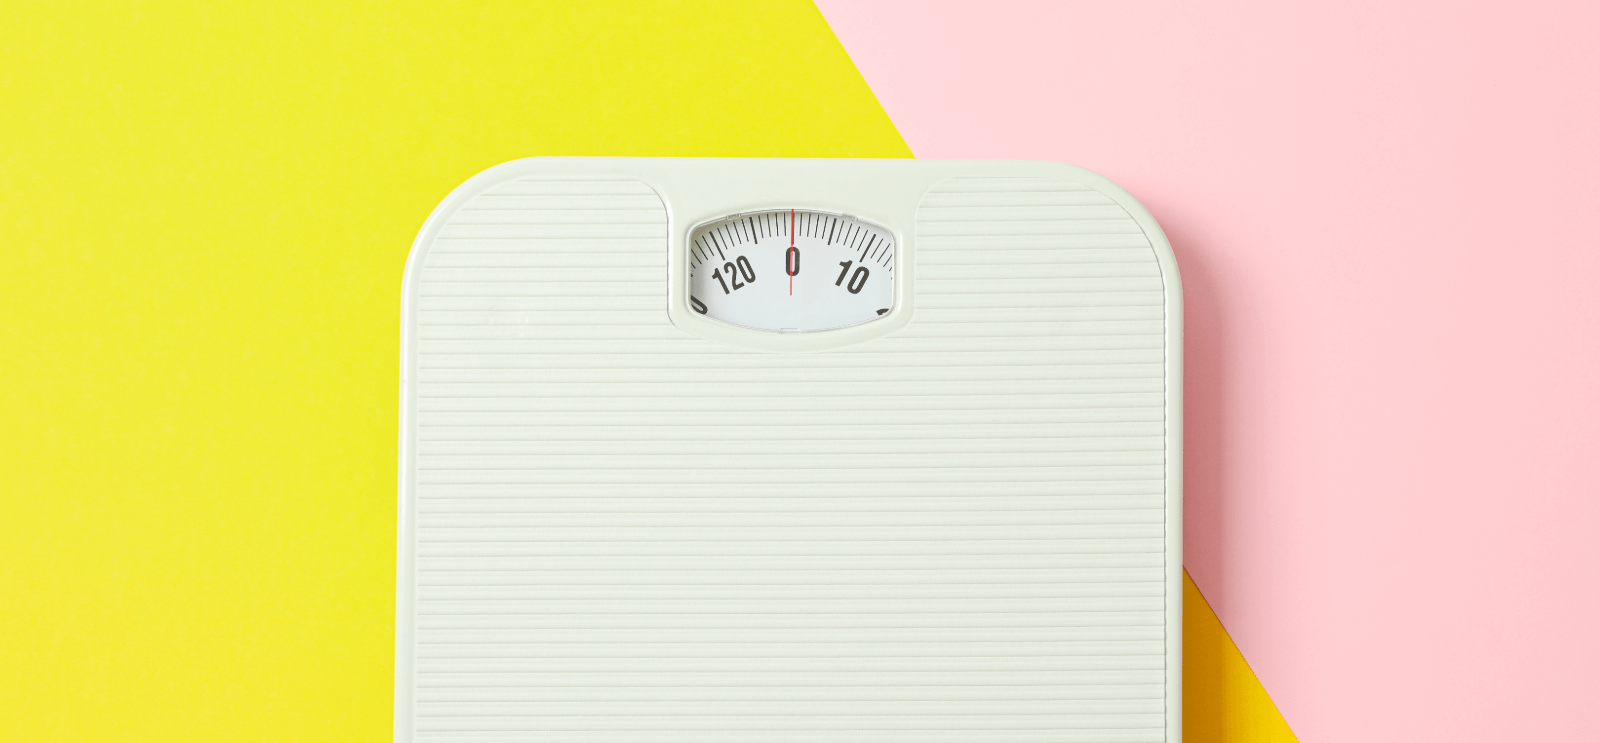 Can Anxiety Cause Weight Gain?